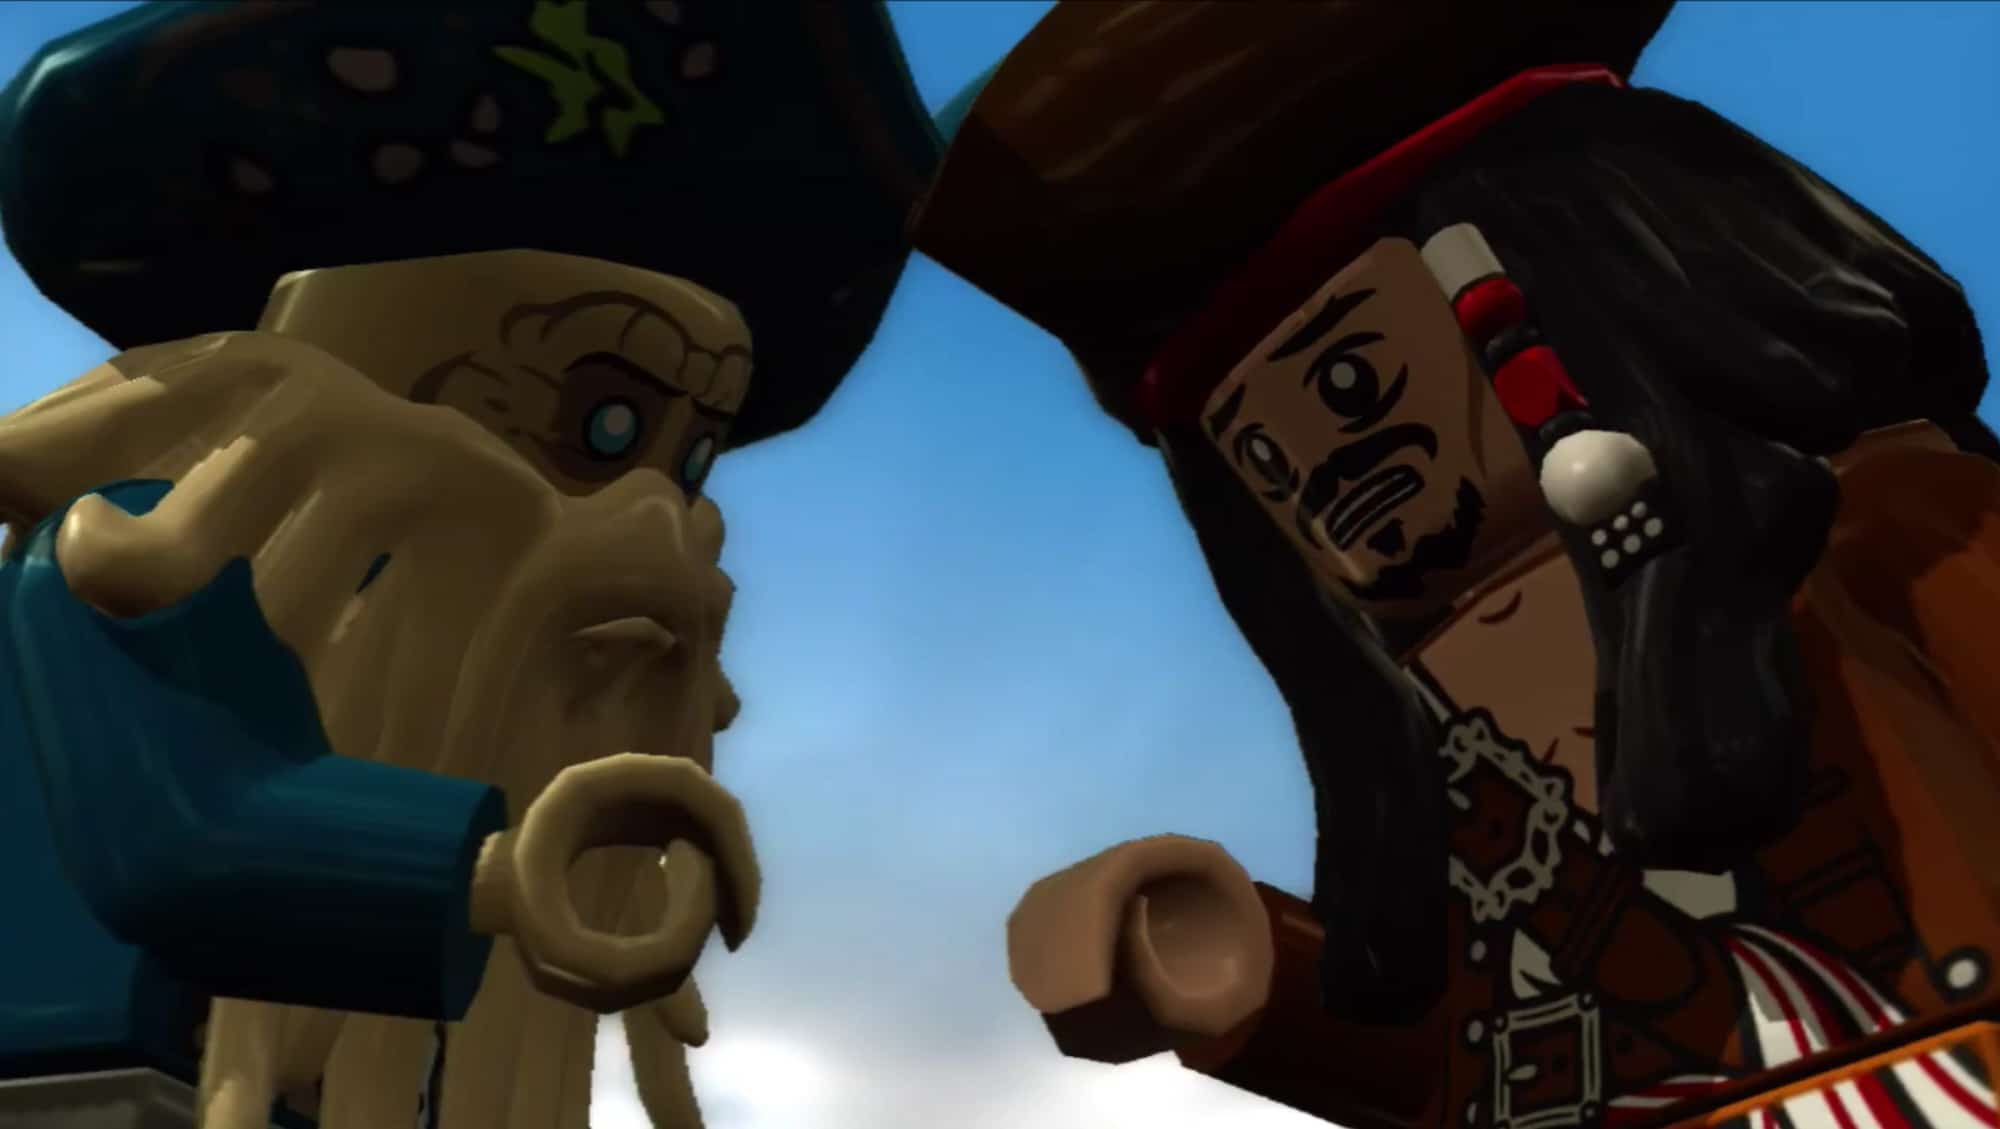 xbox one pirates of the caribbean